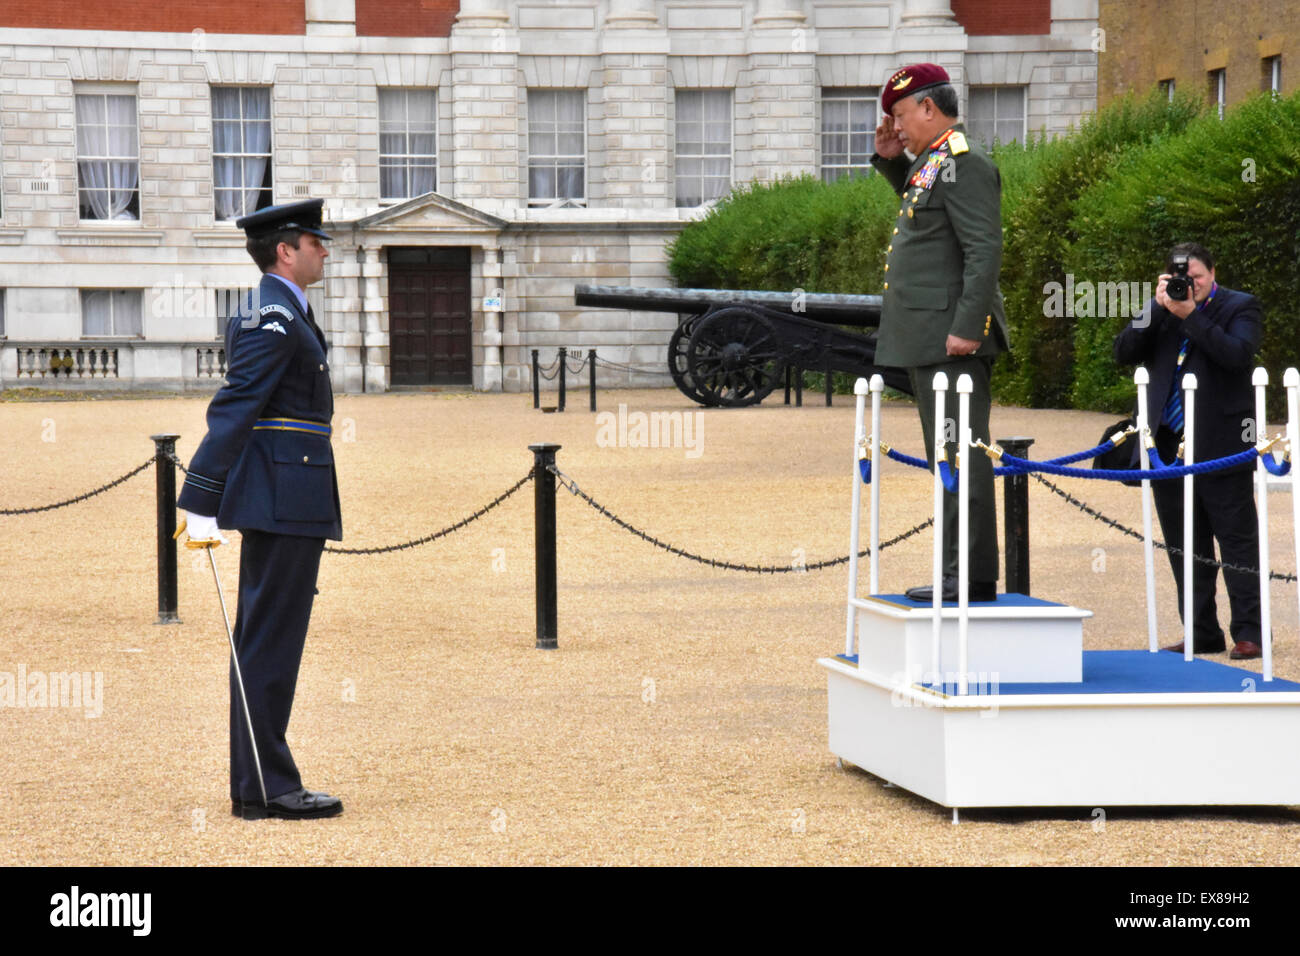 London, UK. 08th July, 2015. Squadron Leader Richard Evans of  The Queen's Colour Squadron, Royal Air Force presented the Guard of Honour to the Malaysian Chief of Defence Forces, General Tan Sri Dato' Sri Zulkifeli Mohd Zin at the Horse Guards Parade, London, July 08, 2015 Credit:  Rosli Othman/Alamy Live News Stock Photo